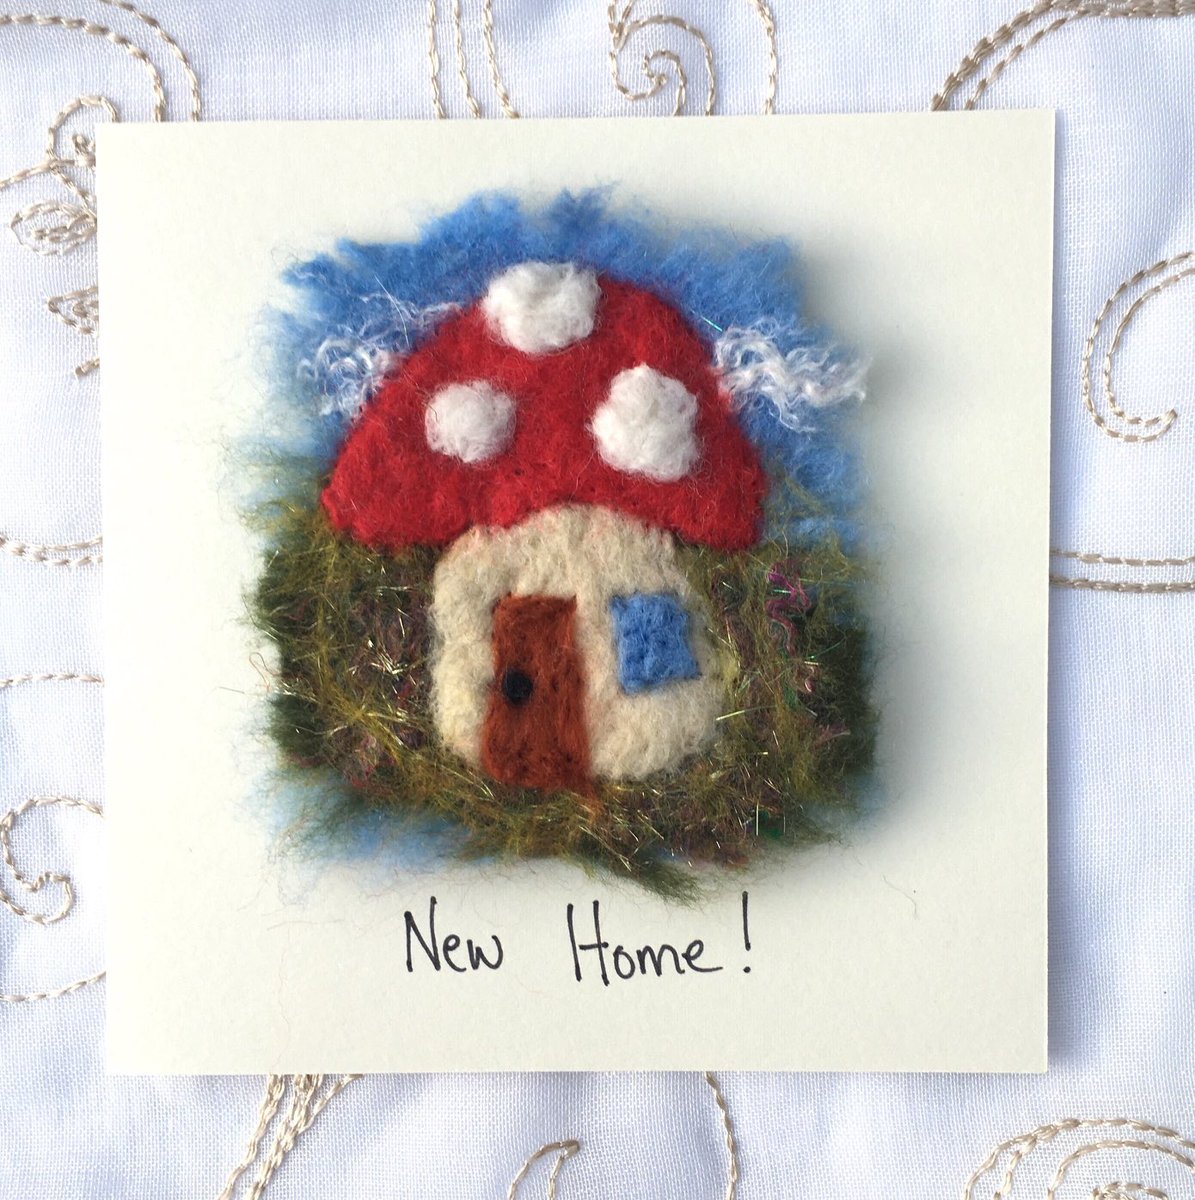 A restock in my #Etsy shop 🍄😊 You can order the blank version too 😊  etsy.com/listing/658600… #mushroom #handmadecard #newhome